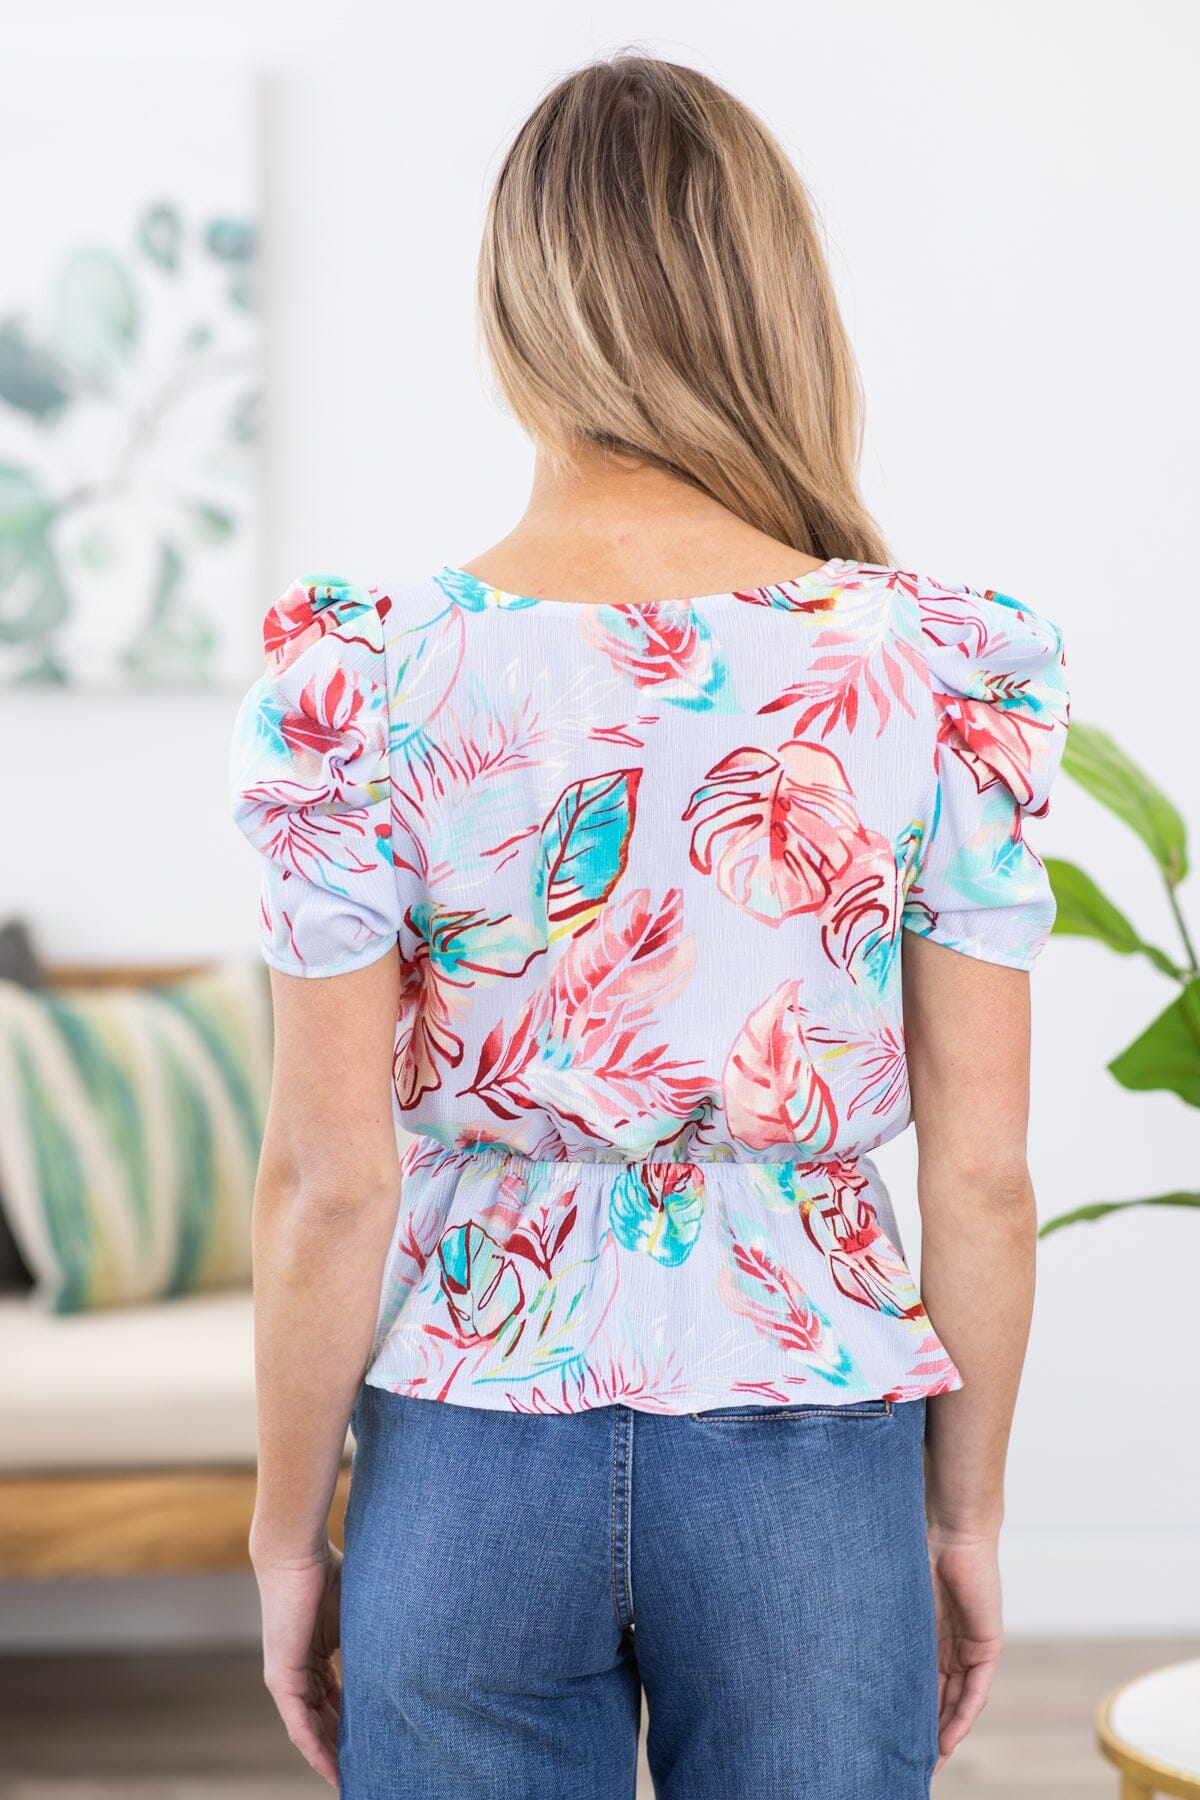 Pastel Blue Multicolor Floral Print Peplum Top - Filly Flair